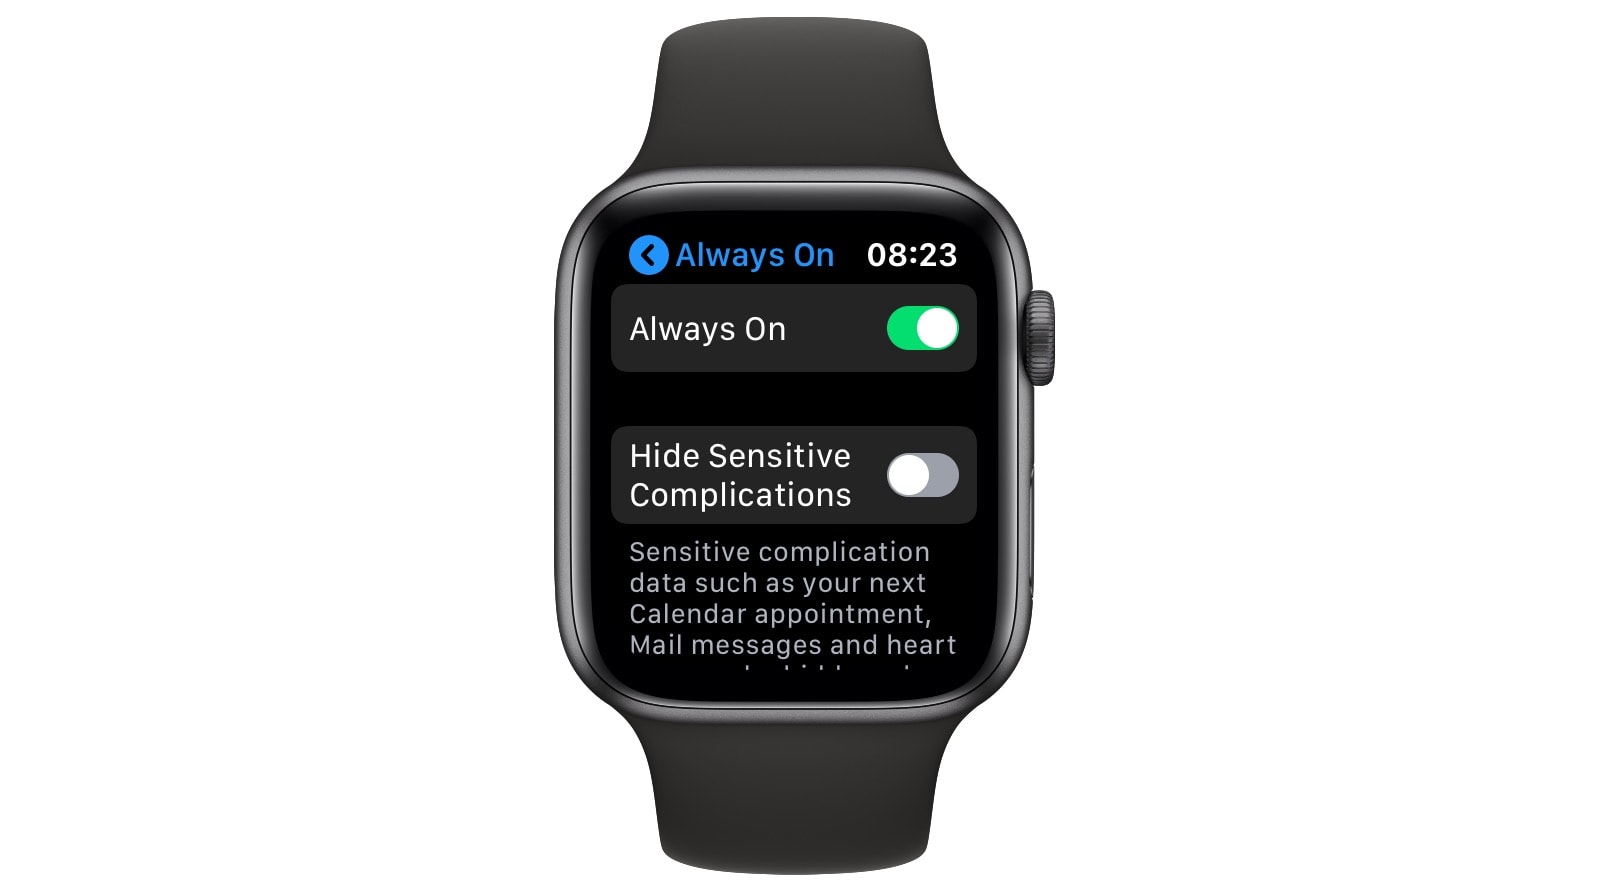   The Apple Watch Series 5 allows you to customize your screen always on. 